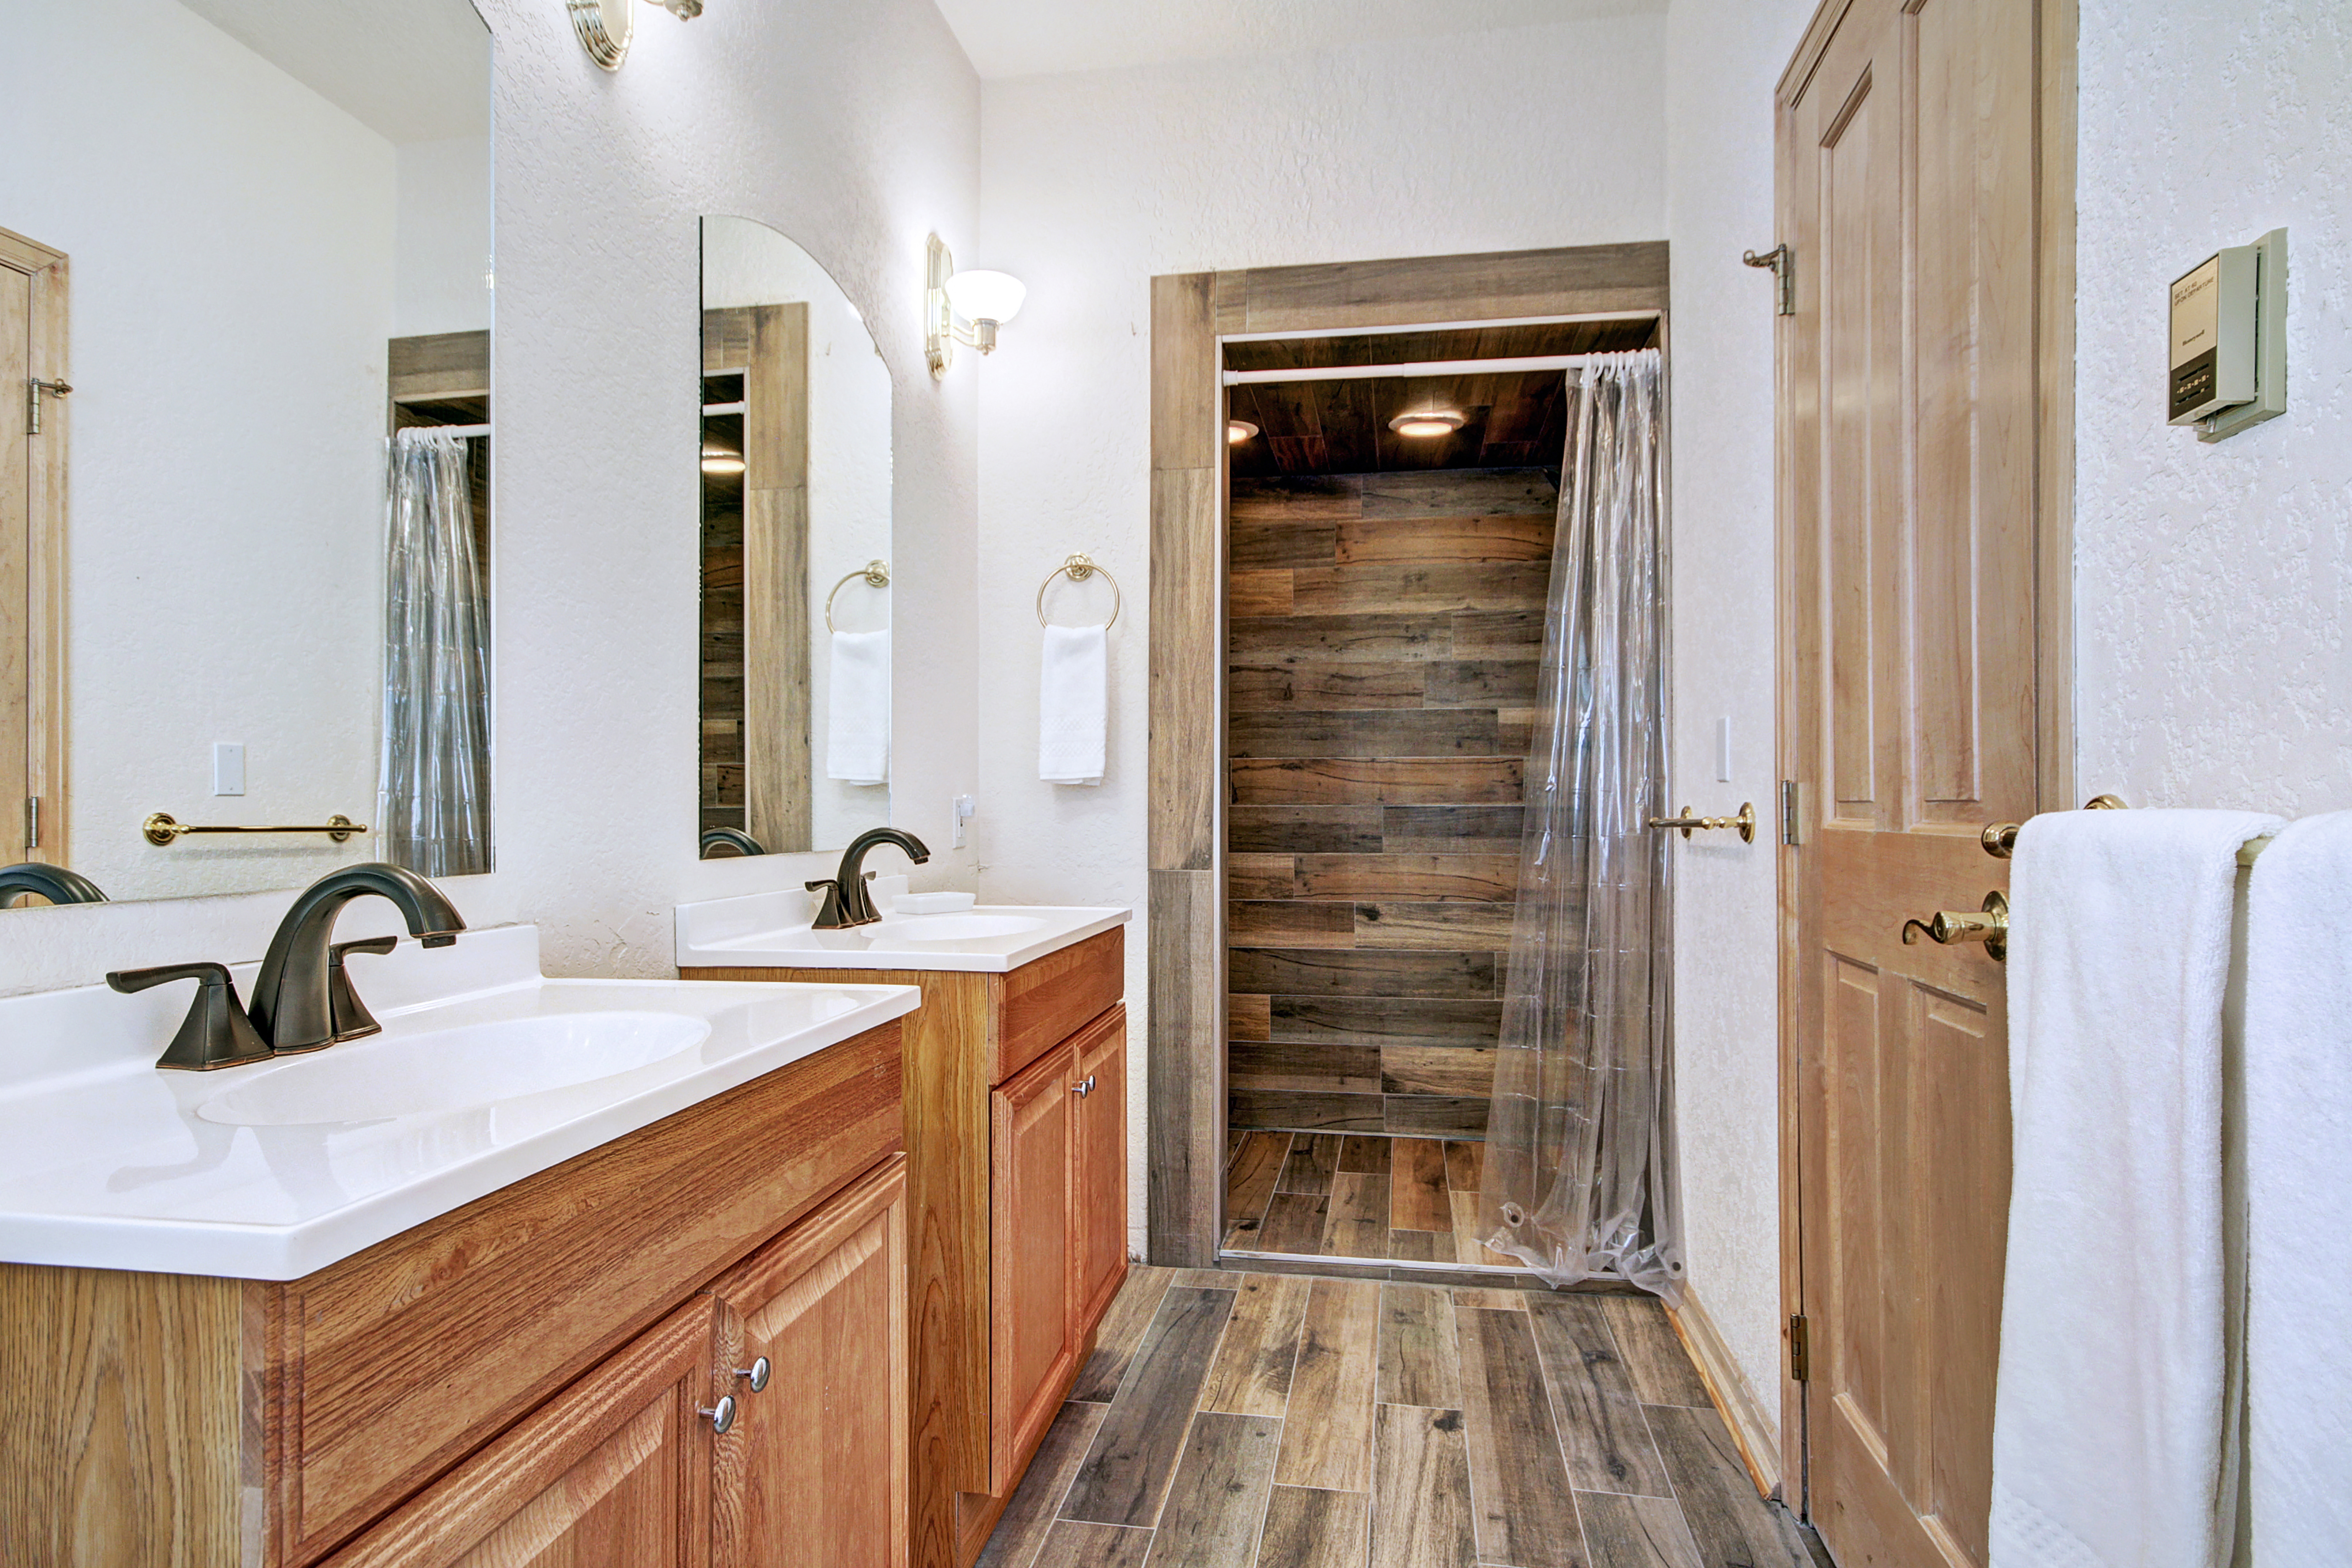 Mid-level master private bath with walk-in shower and 2 sinks.